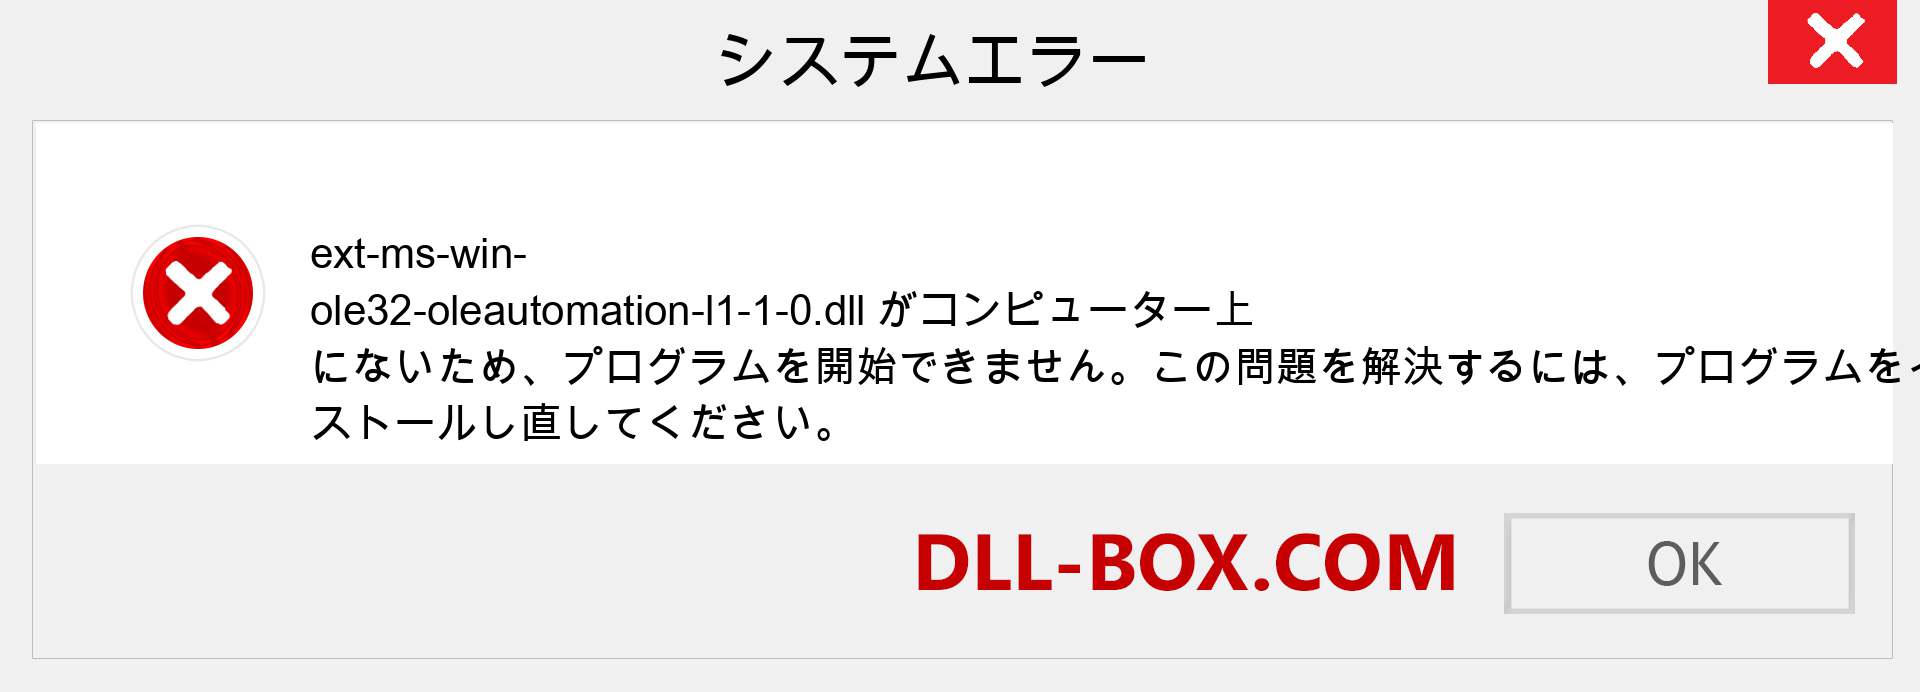 ext-ms-win-ole32-oleautomation-l1-1-0.dllファイルがありませんか？ Windows 7、8、10用にダウンロード-Windows、写真、画像でext-ms-win-ole32-oleautomation-l1-1-0dllの欠落エラーを修正